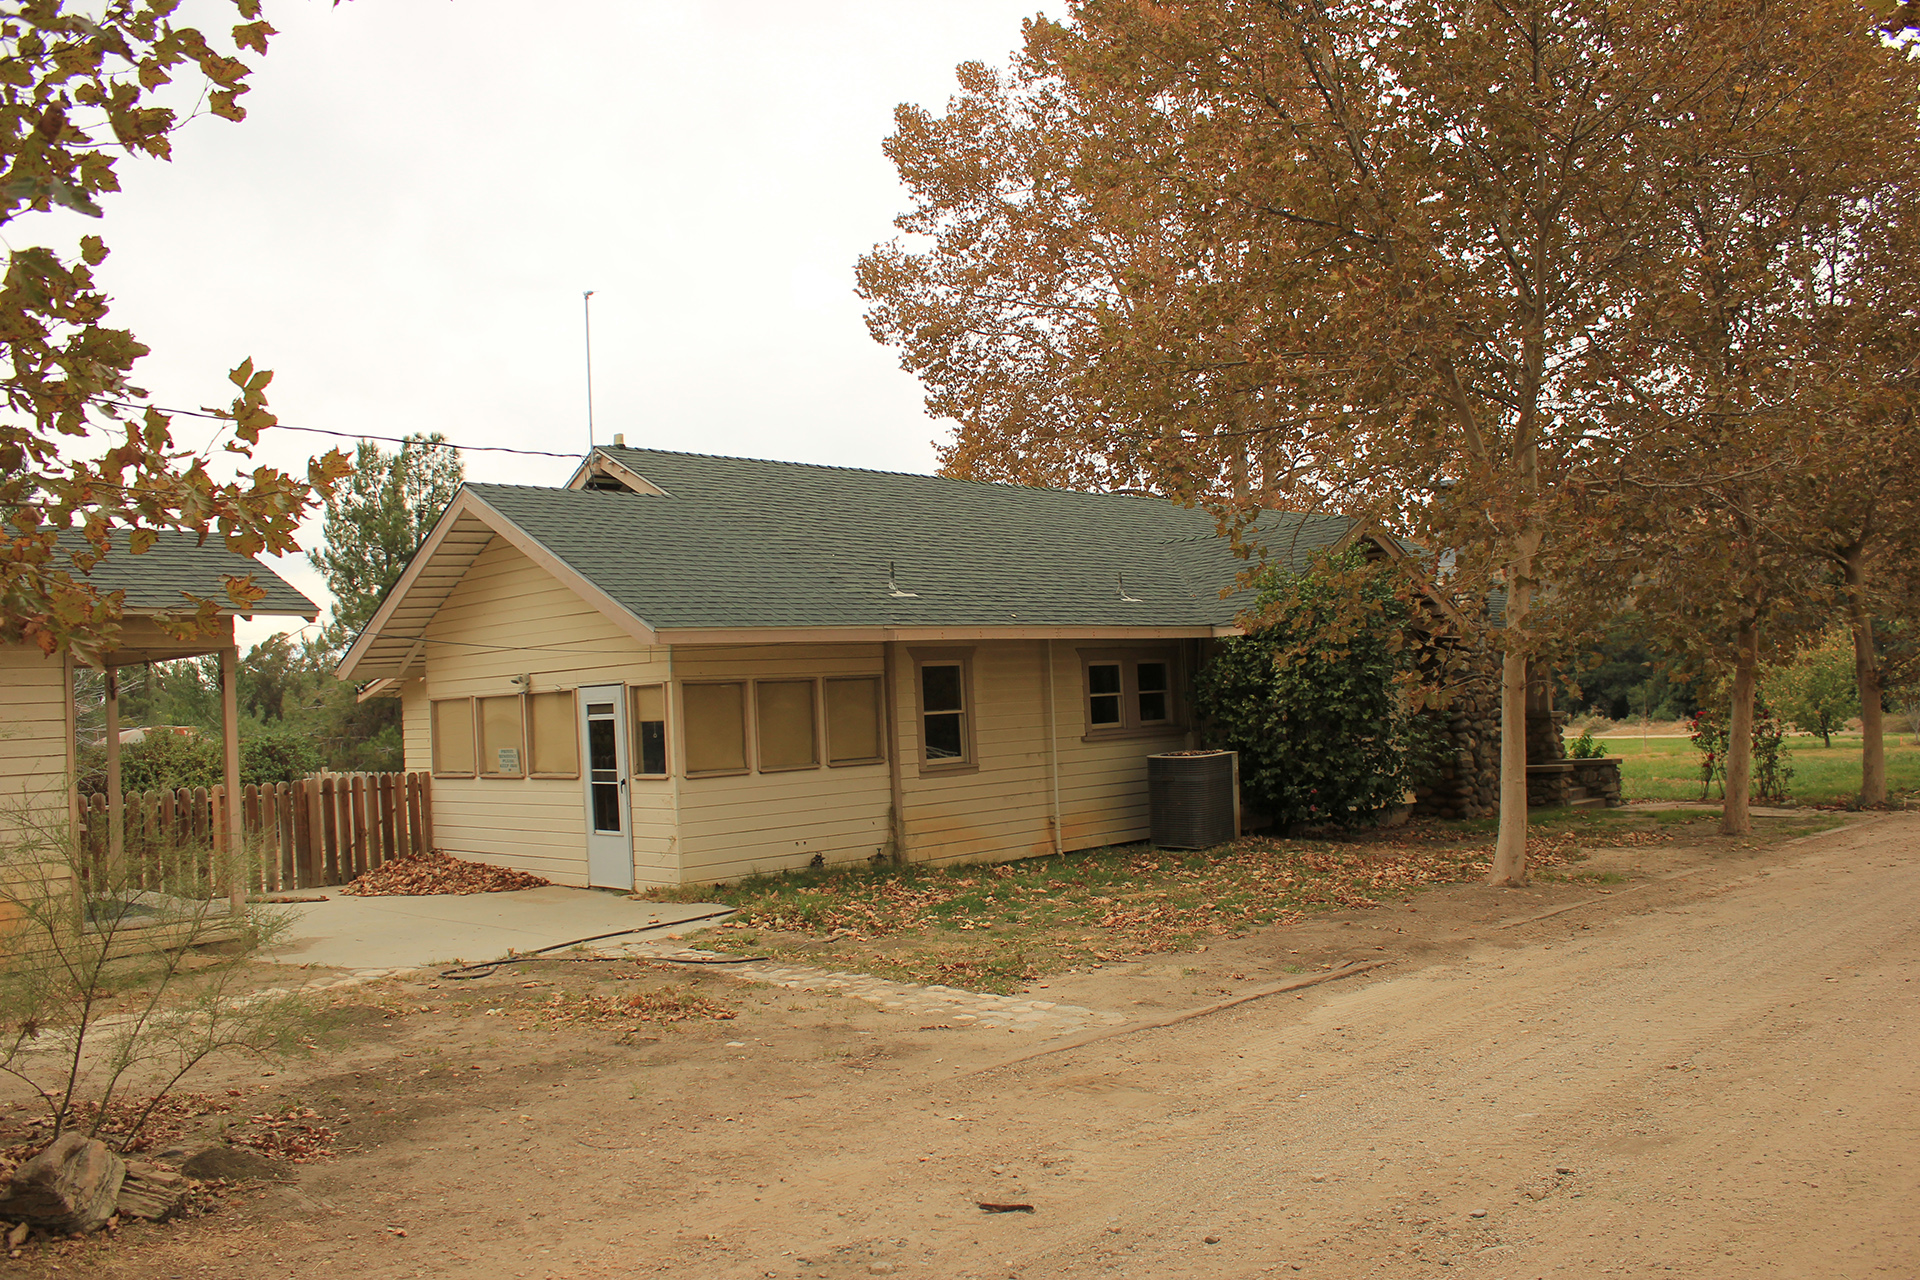 Main Ranch House - Looking Northwest